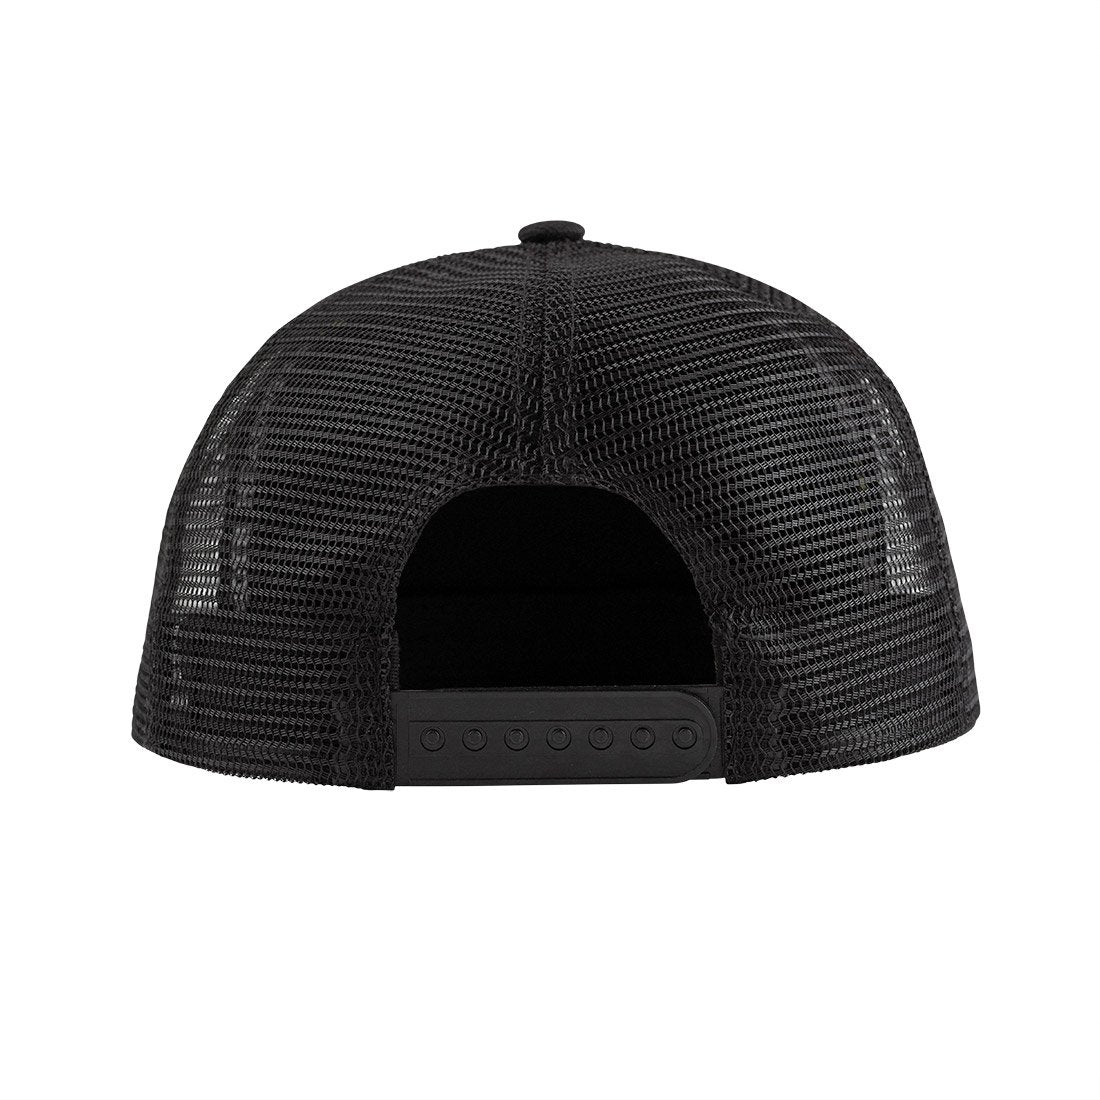 Tactical Patch Trucker - Black Hat - Rear View